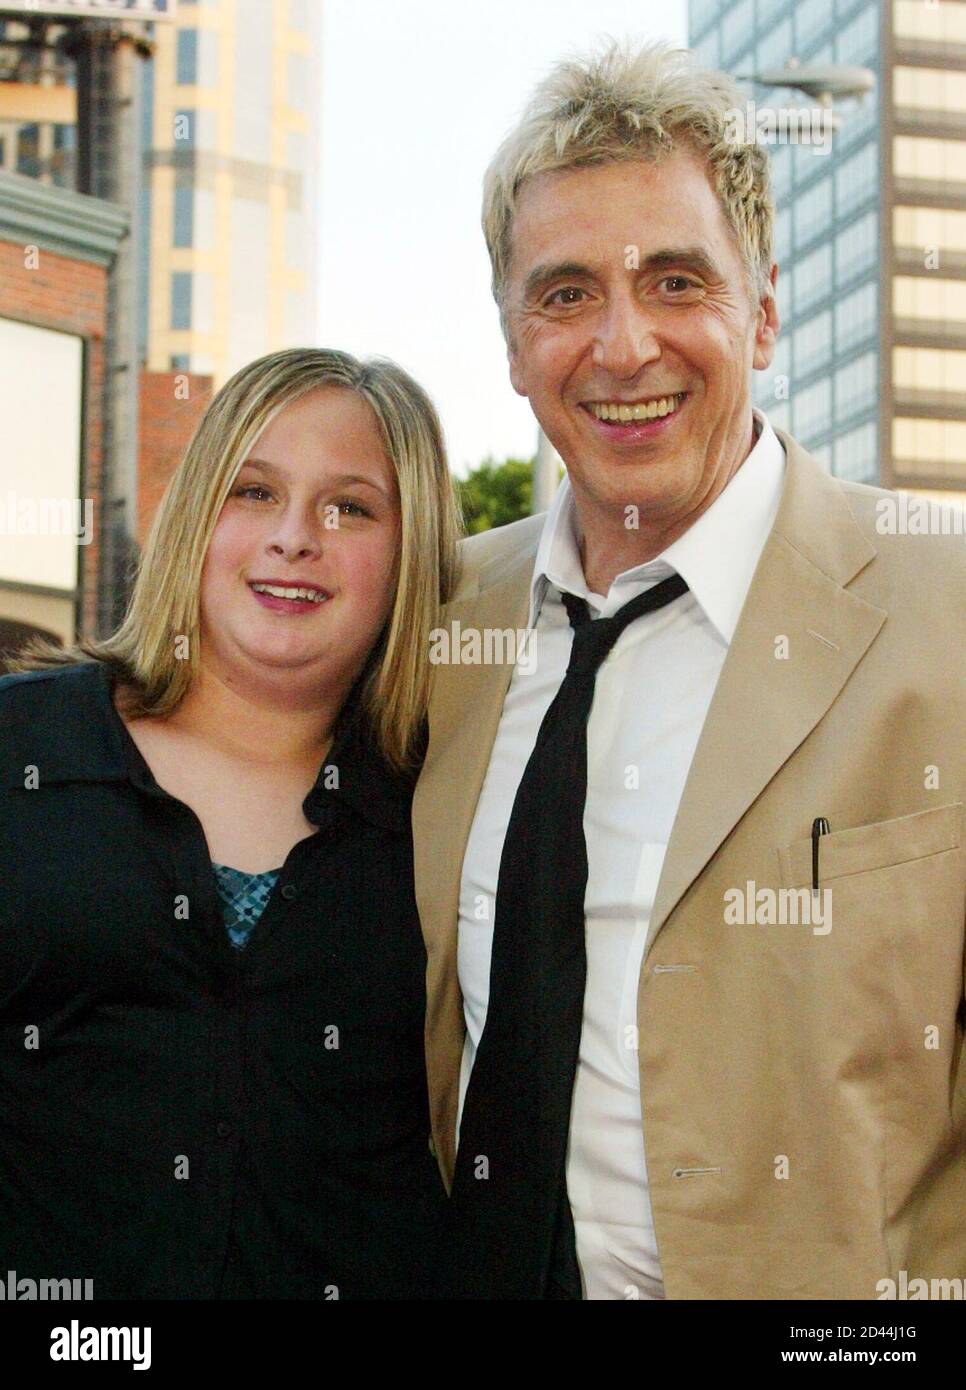 Actor Al Pacino and 12-year old daughter Julie arrive for the premiere of  his new film "Simone" August 13, 2002 in Los Angeles. Pacino portrays a  film director who creates the first